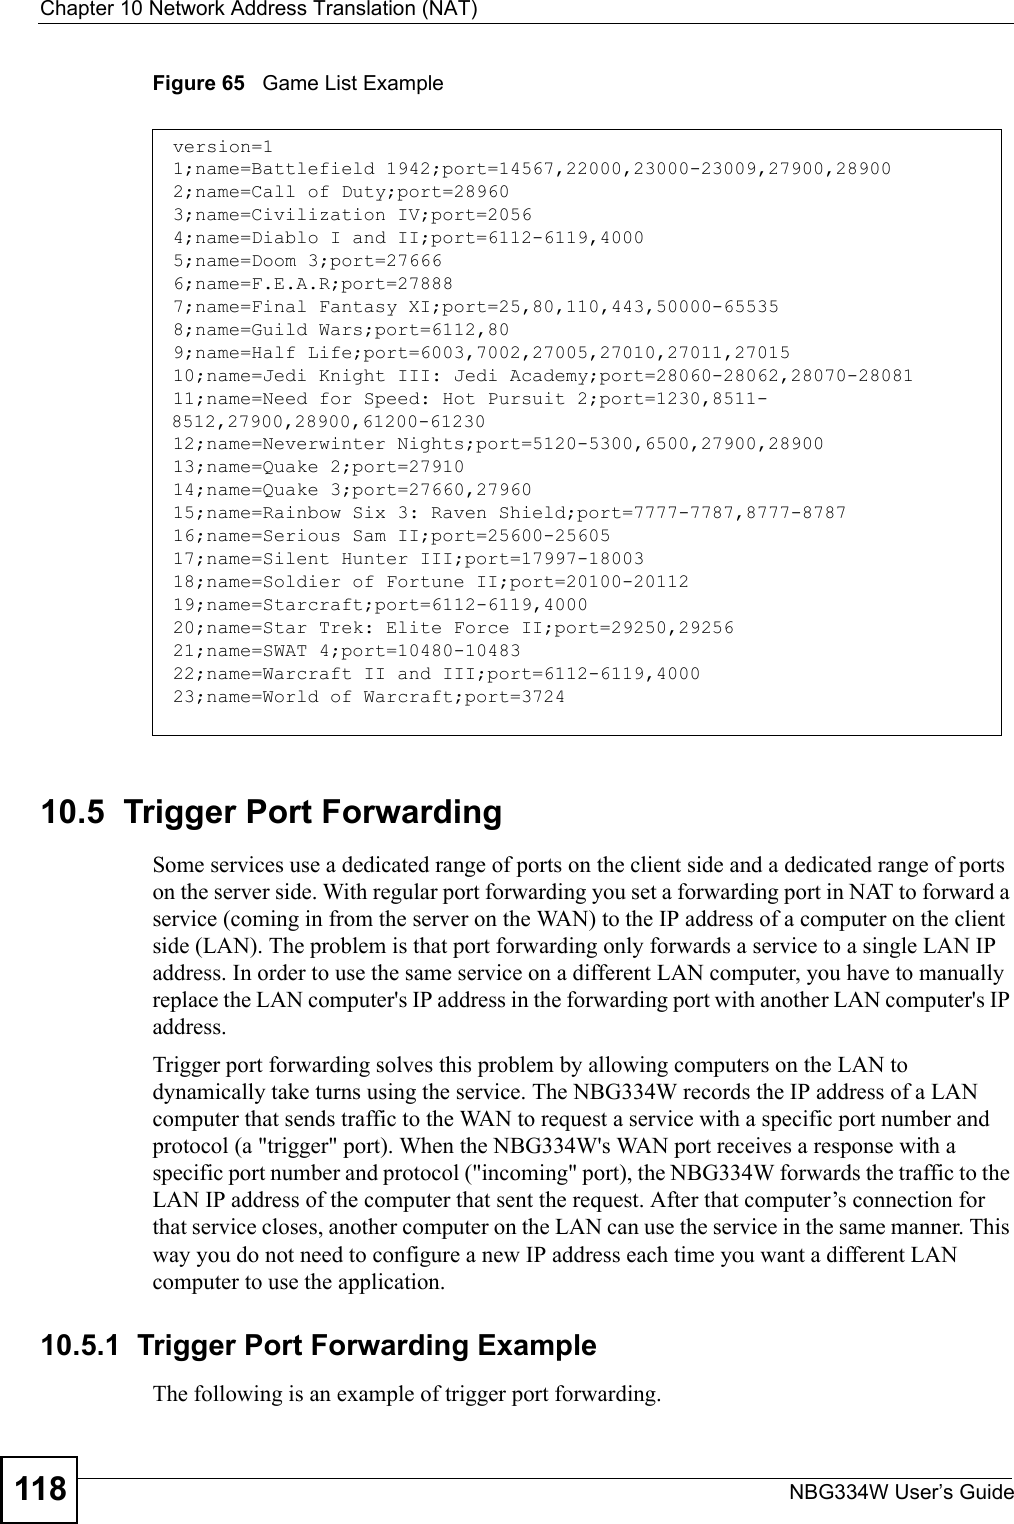 Chapter 10 Network Address Translation (NAT)NBG334W User’s Guide118Figure 65   Game List Example10.5  Trigger Port Forwarding Some services use a dedicated range of ports on the client side and a dedicated range of ports on the server side. With regular port forwarding you set a forwarding port in NAT to forward a service (coming in from the server on the WAN) to the IP address of a computer on the client side (LAN). The problem is that port forwarding only forwards a service to a single LAN IP address. In order to use the same service on a different LAN computer, you have to manually replace the LAN computer&apos;s IP address in the forwarding port with another LAN computer&apos;s IP address. Trigger port forwarding solves this problem by allowing computers on the LAN to dynamically take turns using the service. The NBG334W records the IP address of a LAN computer that sends traffic to the WAN to request a service with a specific port number and protocol (a &quot;trigger&quot; port). When the NBG334W&apos;s WAN port receives a response with a specific port number and protocol (&quot;incoming&quot; port), the NBG334W forwards the traffic to the LAN IP address of the computer that sent the request. After that computer’s connection for that service closes, another computer on the LAN can use the service in the same manner. This way you do not need to configure a new IP address each time you want a different LAN computer to use the application.10.5.1  Trigger Port Forwarding Example The following is an example of trigger port forwarding.version=11;name=Battlefield 1942;port=14567,22000,23000-23009,27900,289002;name=Call of Duty;port=289603;name=Civilization IV;port=20564;name=Diablo I and II;port=6112-6119,40005;name=Doom 3;port=276666;name=F.E.A.R;port=278887;name=Final Fantasy XI;port=25,80,110,443,50000-655358;name=Guild Wars;port=6112,809;name=Half Life;port=6003,7002,27005,27010,27011,2701510;name=Jedi Knight III: Jedi Academy;port=28060-28062,28070-2808111;name=Need for Speed: Hot Pursuit 2;port=1230,8511-8512,27900,28900,61200-6123012;name=Neverwinter Nights;port=5120-5300,6500,27900,2890013;name=Quake 2;port=2791014;name=Quake 3;port=27660,2796015;name=Rainbow Six 3: Raven Shield;port=7777-7787,8777-878716;name=Serious Sam II;port=25600-2560517;name=Silent Hunter III;port=17997-1800318;name=Soldier of Fortune II;port=20100-2011219;name=Starcraft;port=6112-6119,400020;name=Star Trek: Elite Force II;port=29250,2925621;name=SWAT 4;port=10480-1048322;name=Warcraft II and III;port=6112-6119,400023;name=World of Warcraft;port=3724